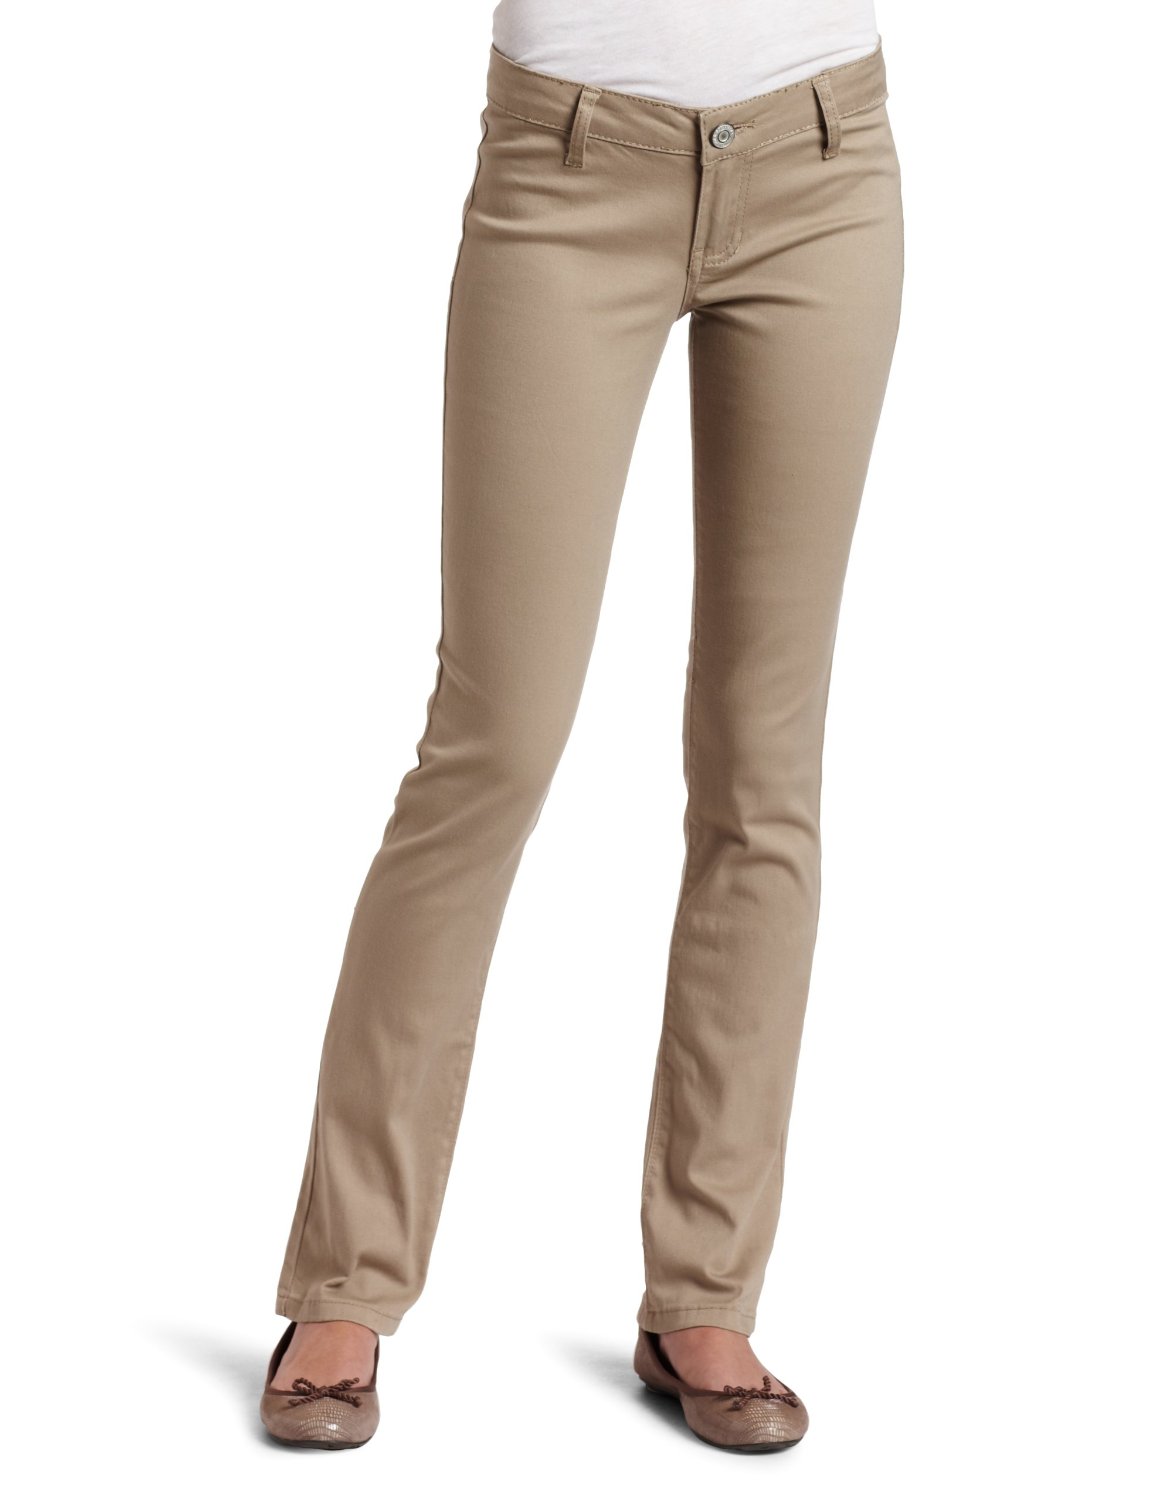 All About Cute Khaki Pants for Women - Gustdi Blog: October 2012